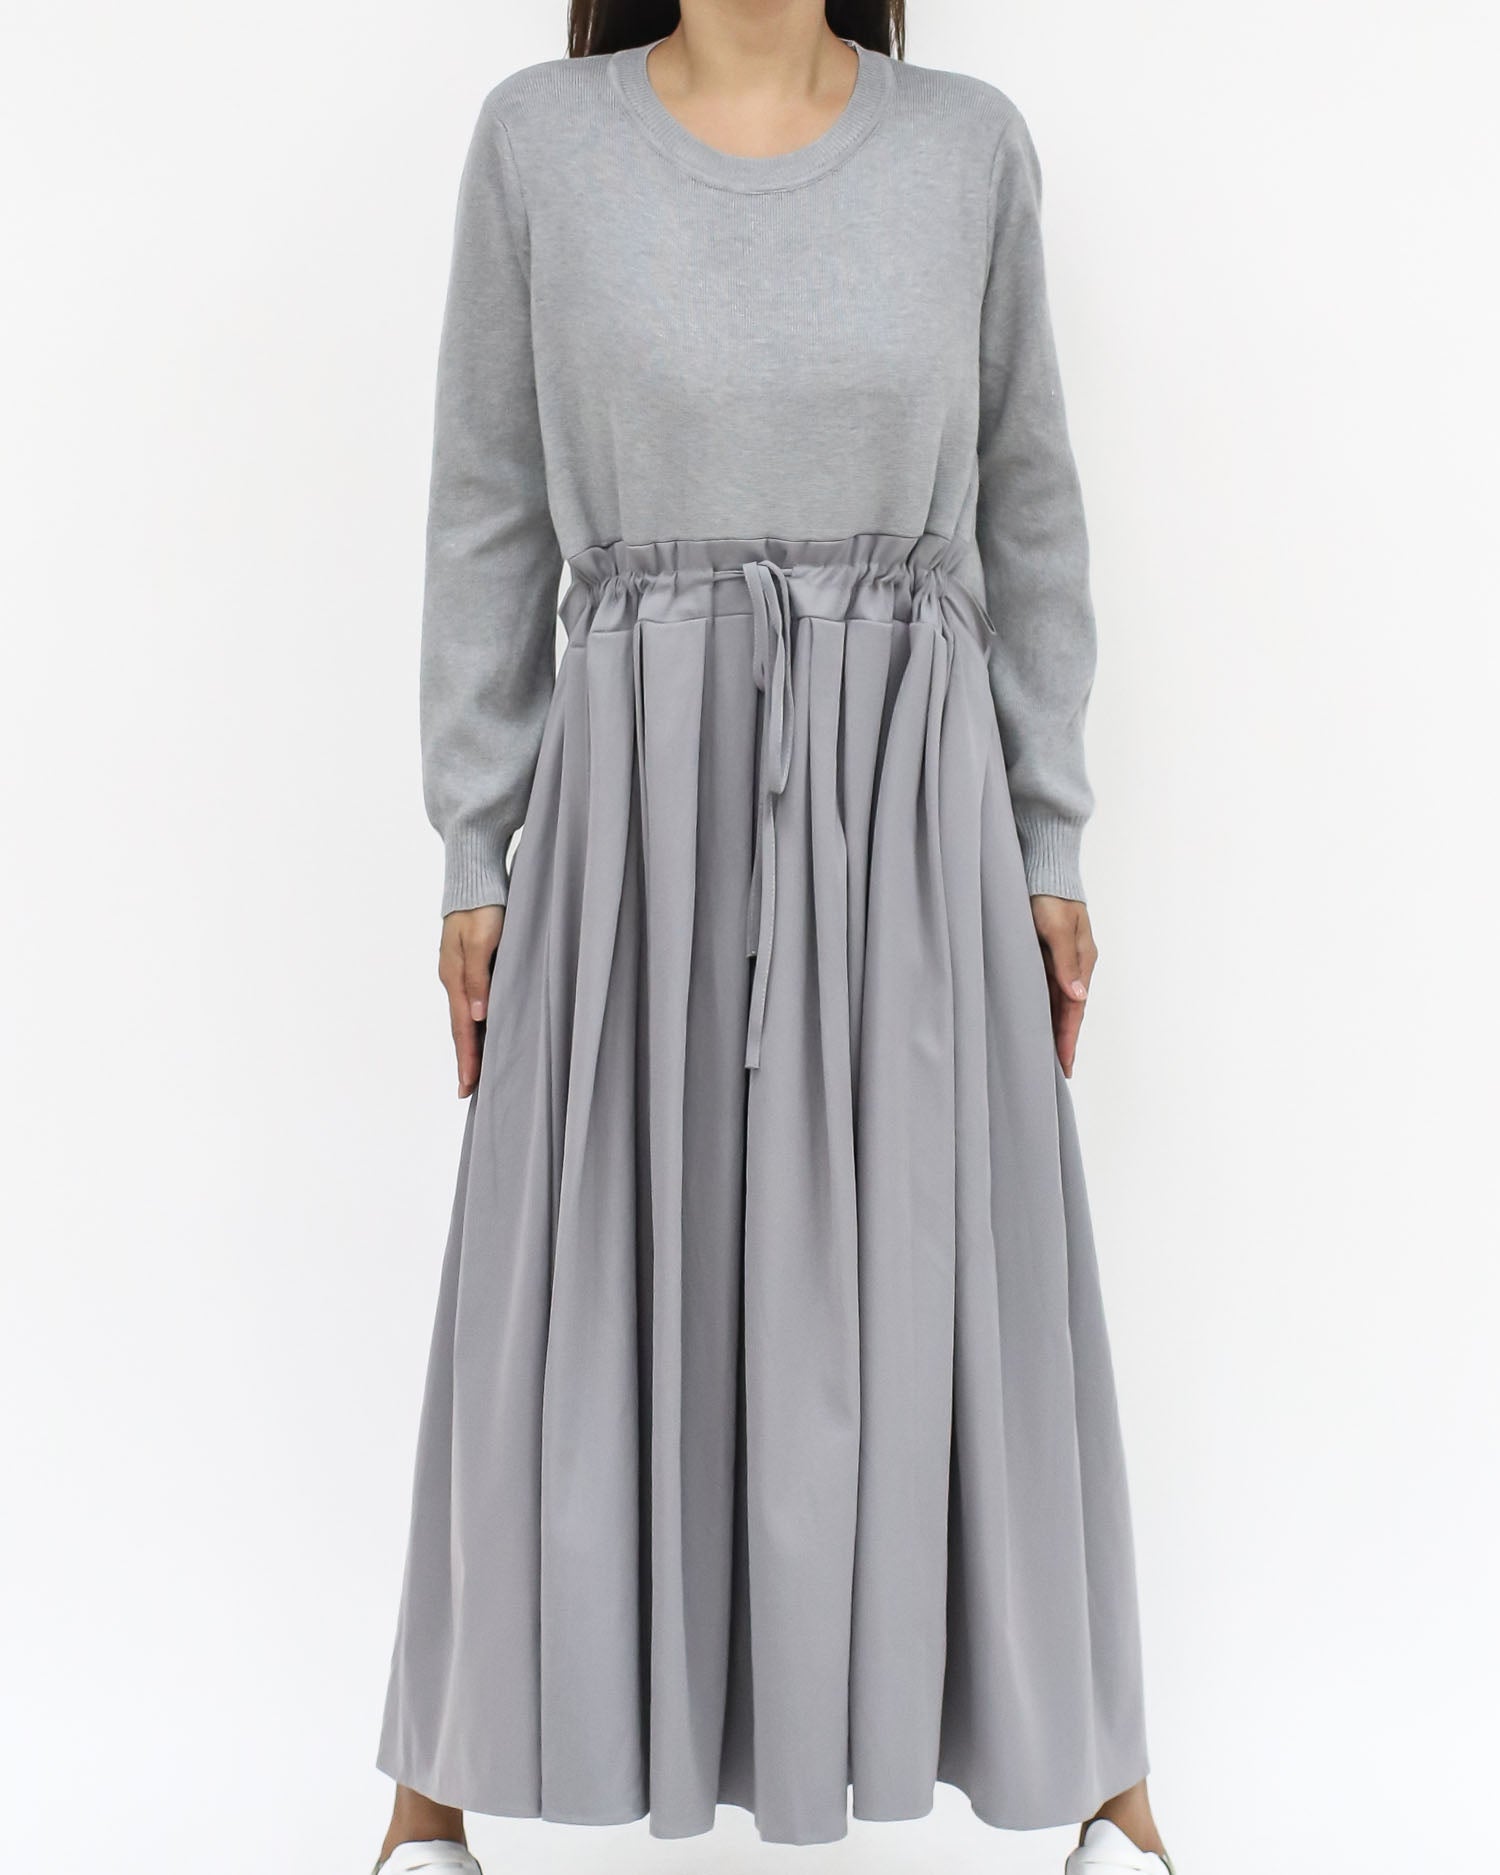 grey knitted & shirt pleats dress *pre-order* – STYLEGAL